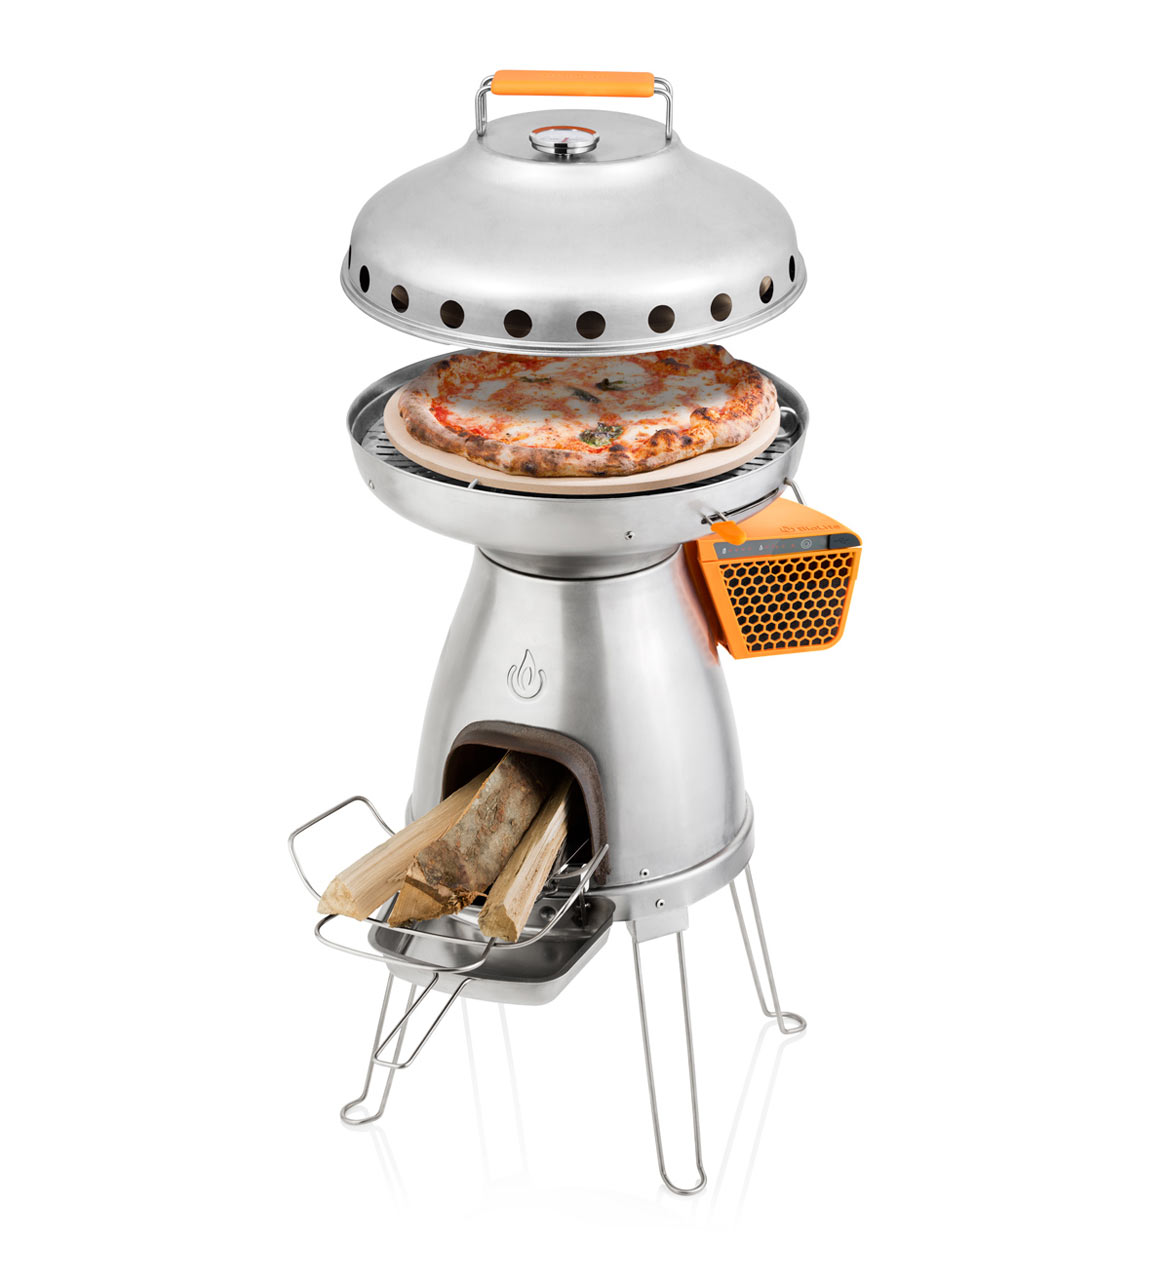 BaseCamp is a wood burning stove and grill that converts heat into usable electricity